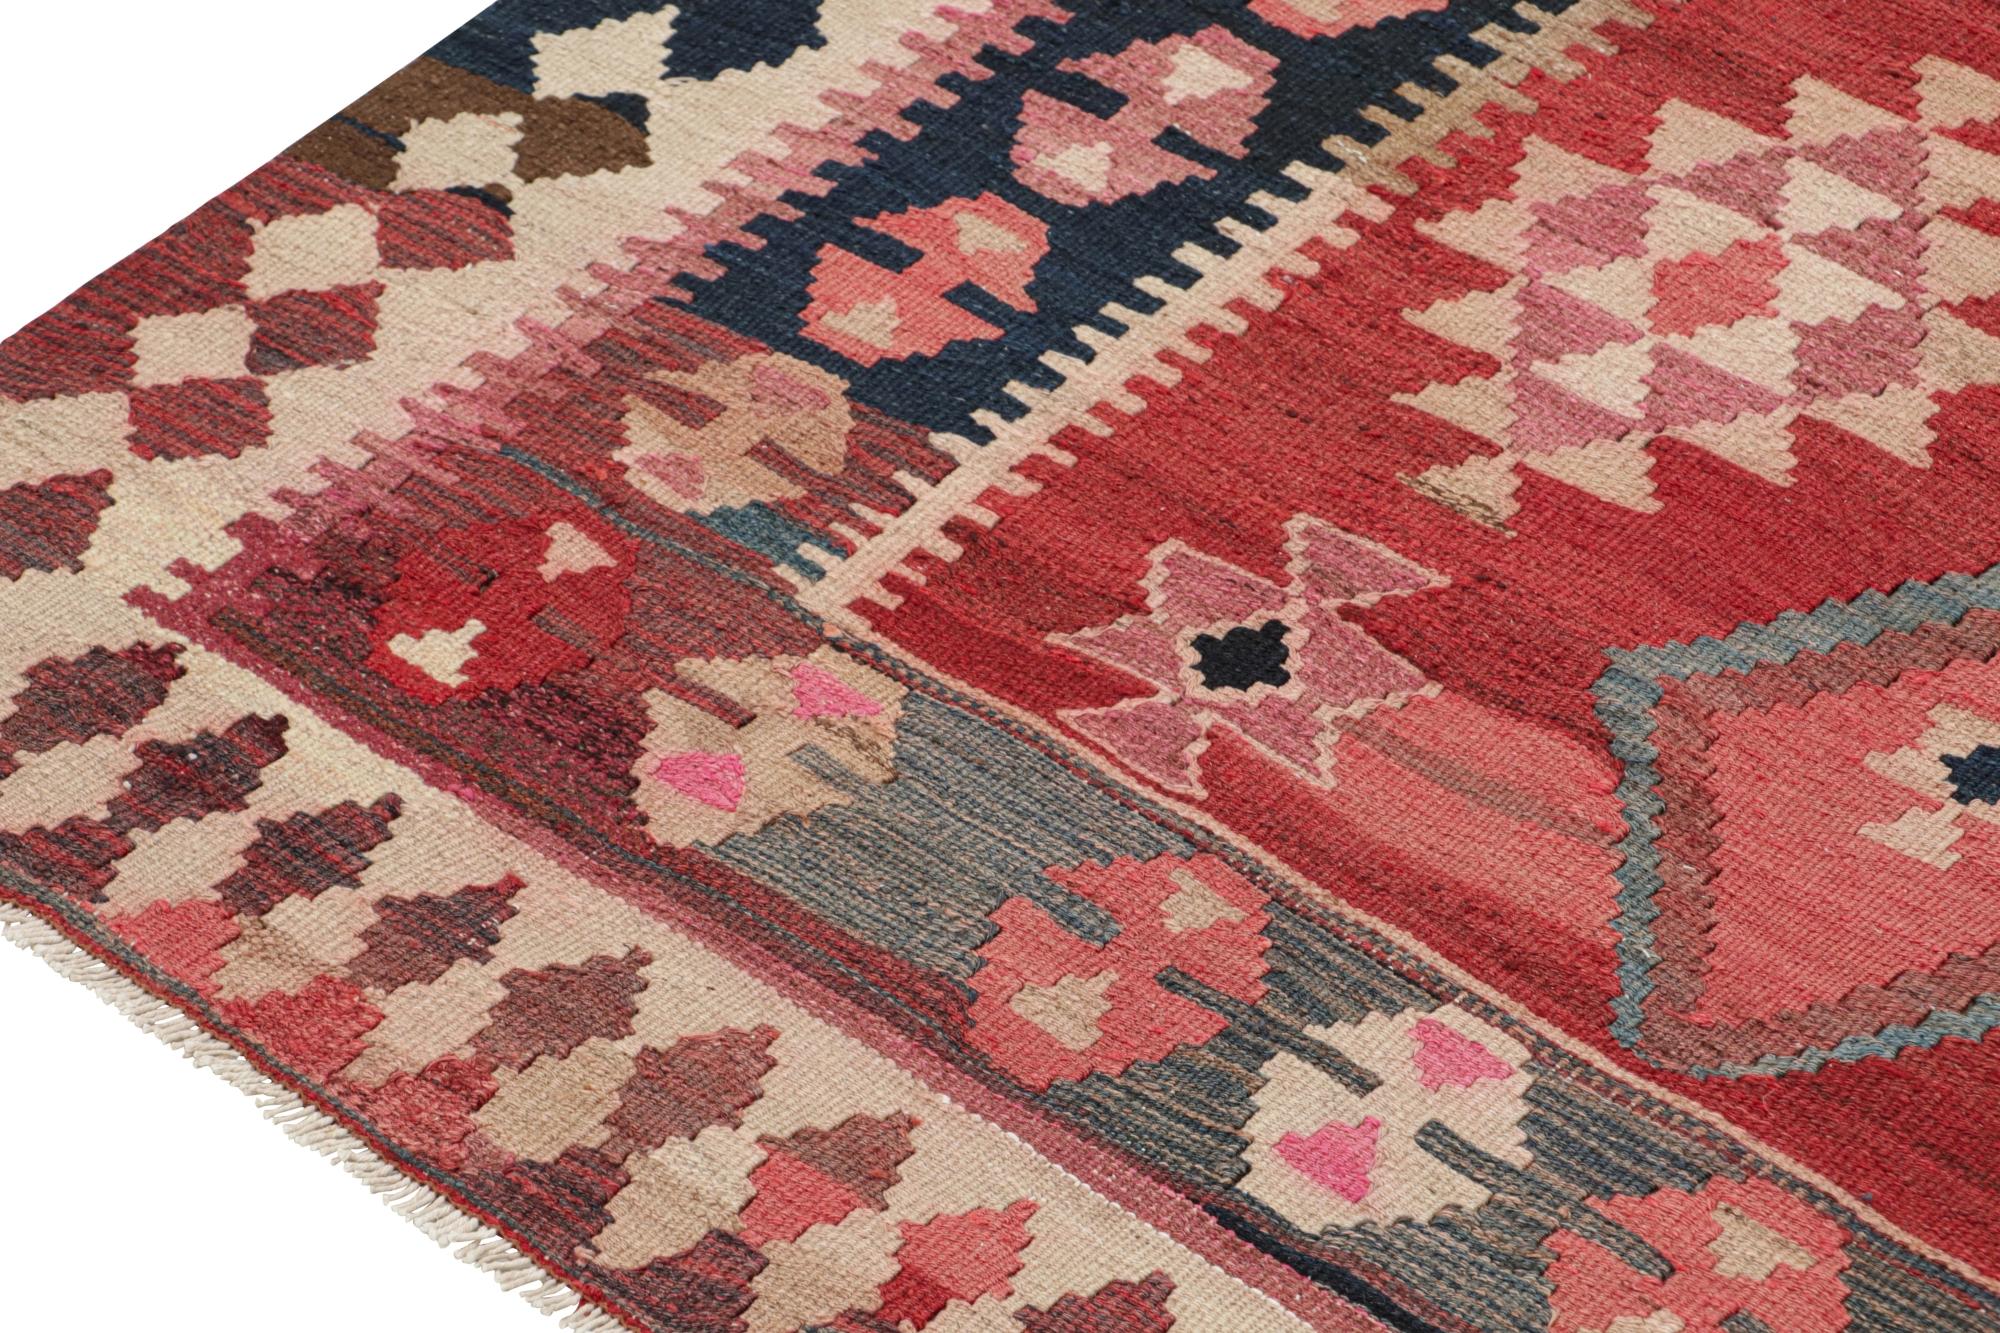 Mid-20th Century Vintage Shahsavan Persian Kilim in Red, Blue & Pink Patterns For Sale